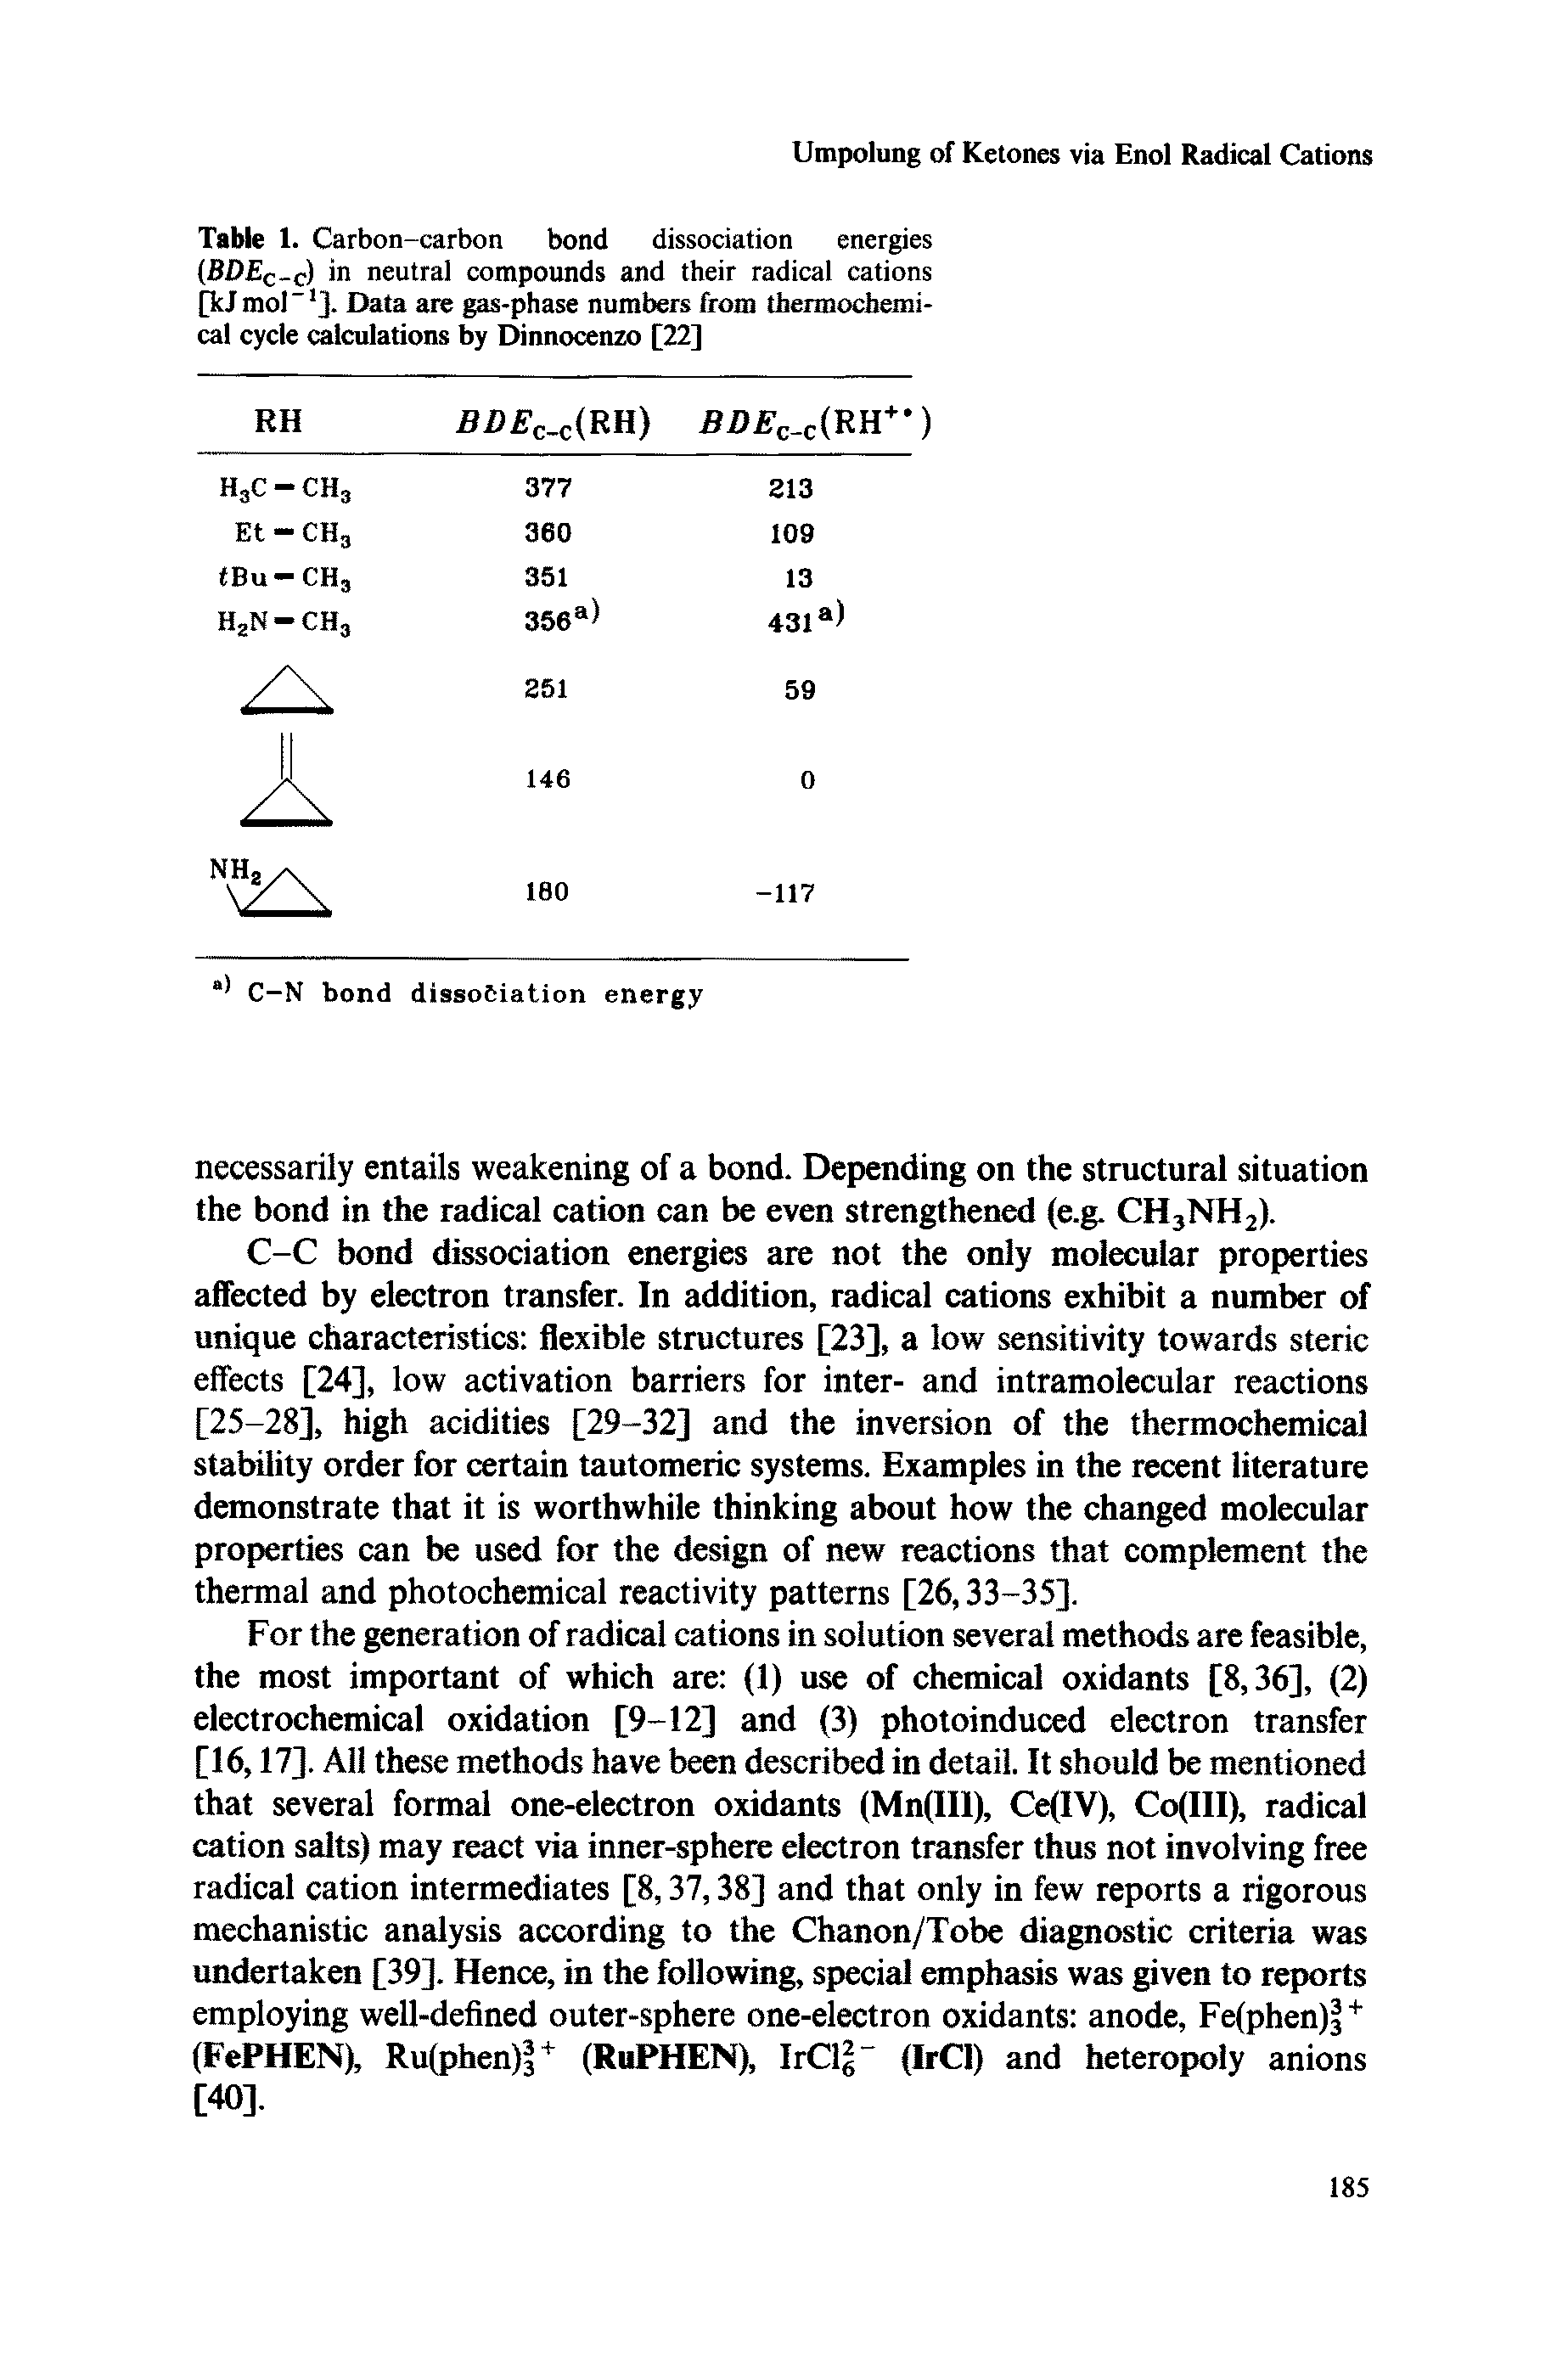 Table 1. Carbon-carbon bond dissociation energies BDEc-c) in neutral compounds and their radical cations [kjmol" ]. Data are gas-phase numbers from thermochemical cycle calculations by Dinnocenzo [22]...